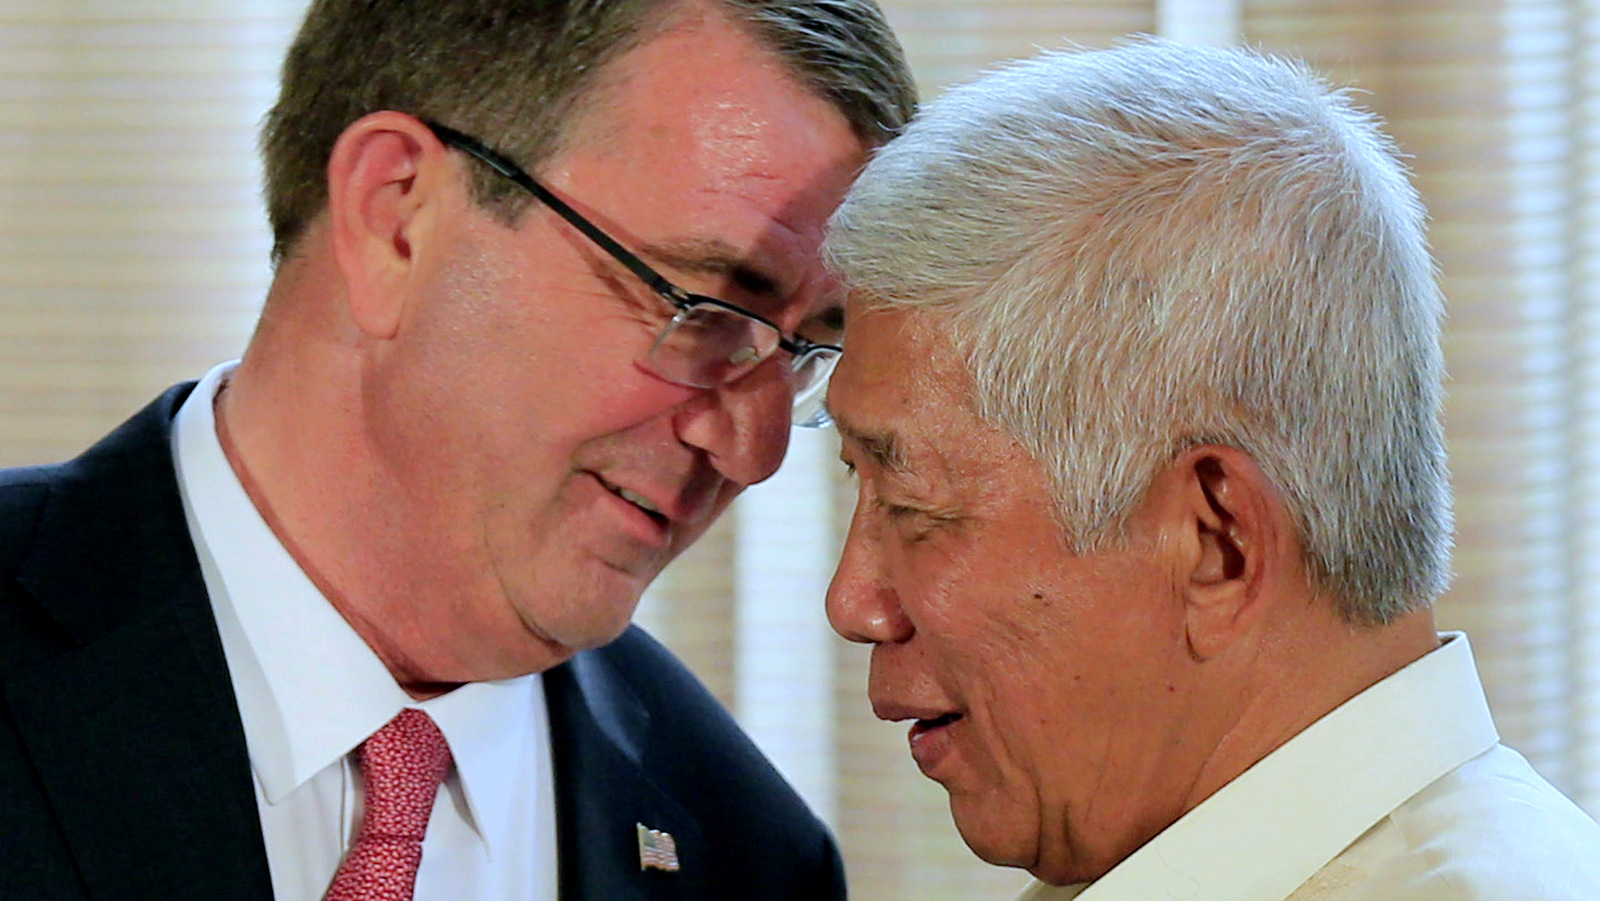 U.S. Defense Secretary Ash Carter, left, talks with his Philippine counterpart Voltaire Gazmin during their joint press conference at the Malacanang presidential palace in Manila, Philippines on Thursday, April 14, 2016. The United States on Thursday revealed for the first time that American ships have started conducting joint patrols with the Philippines in the South China Sea, a somewhat rare move not done with many other partners in the region. (Romeo Ranoco/Pool Photo via AP)